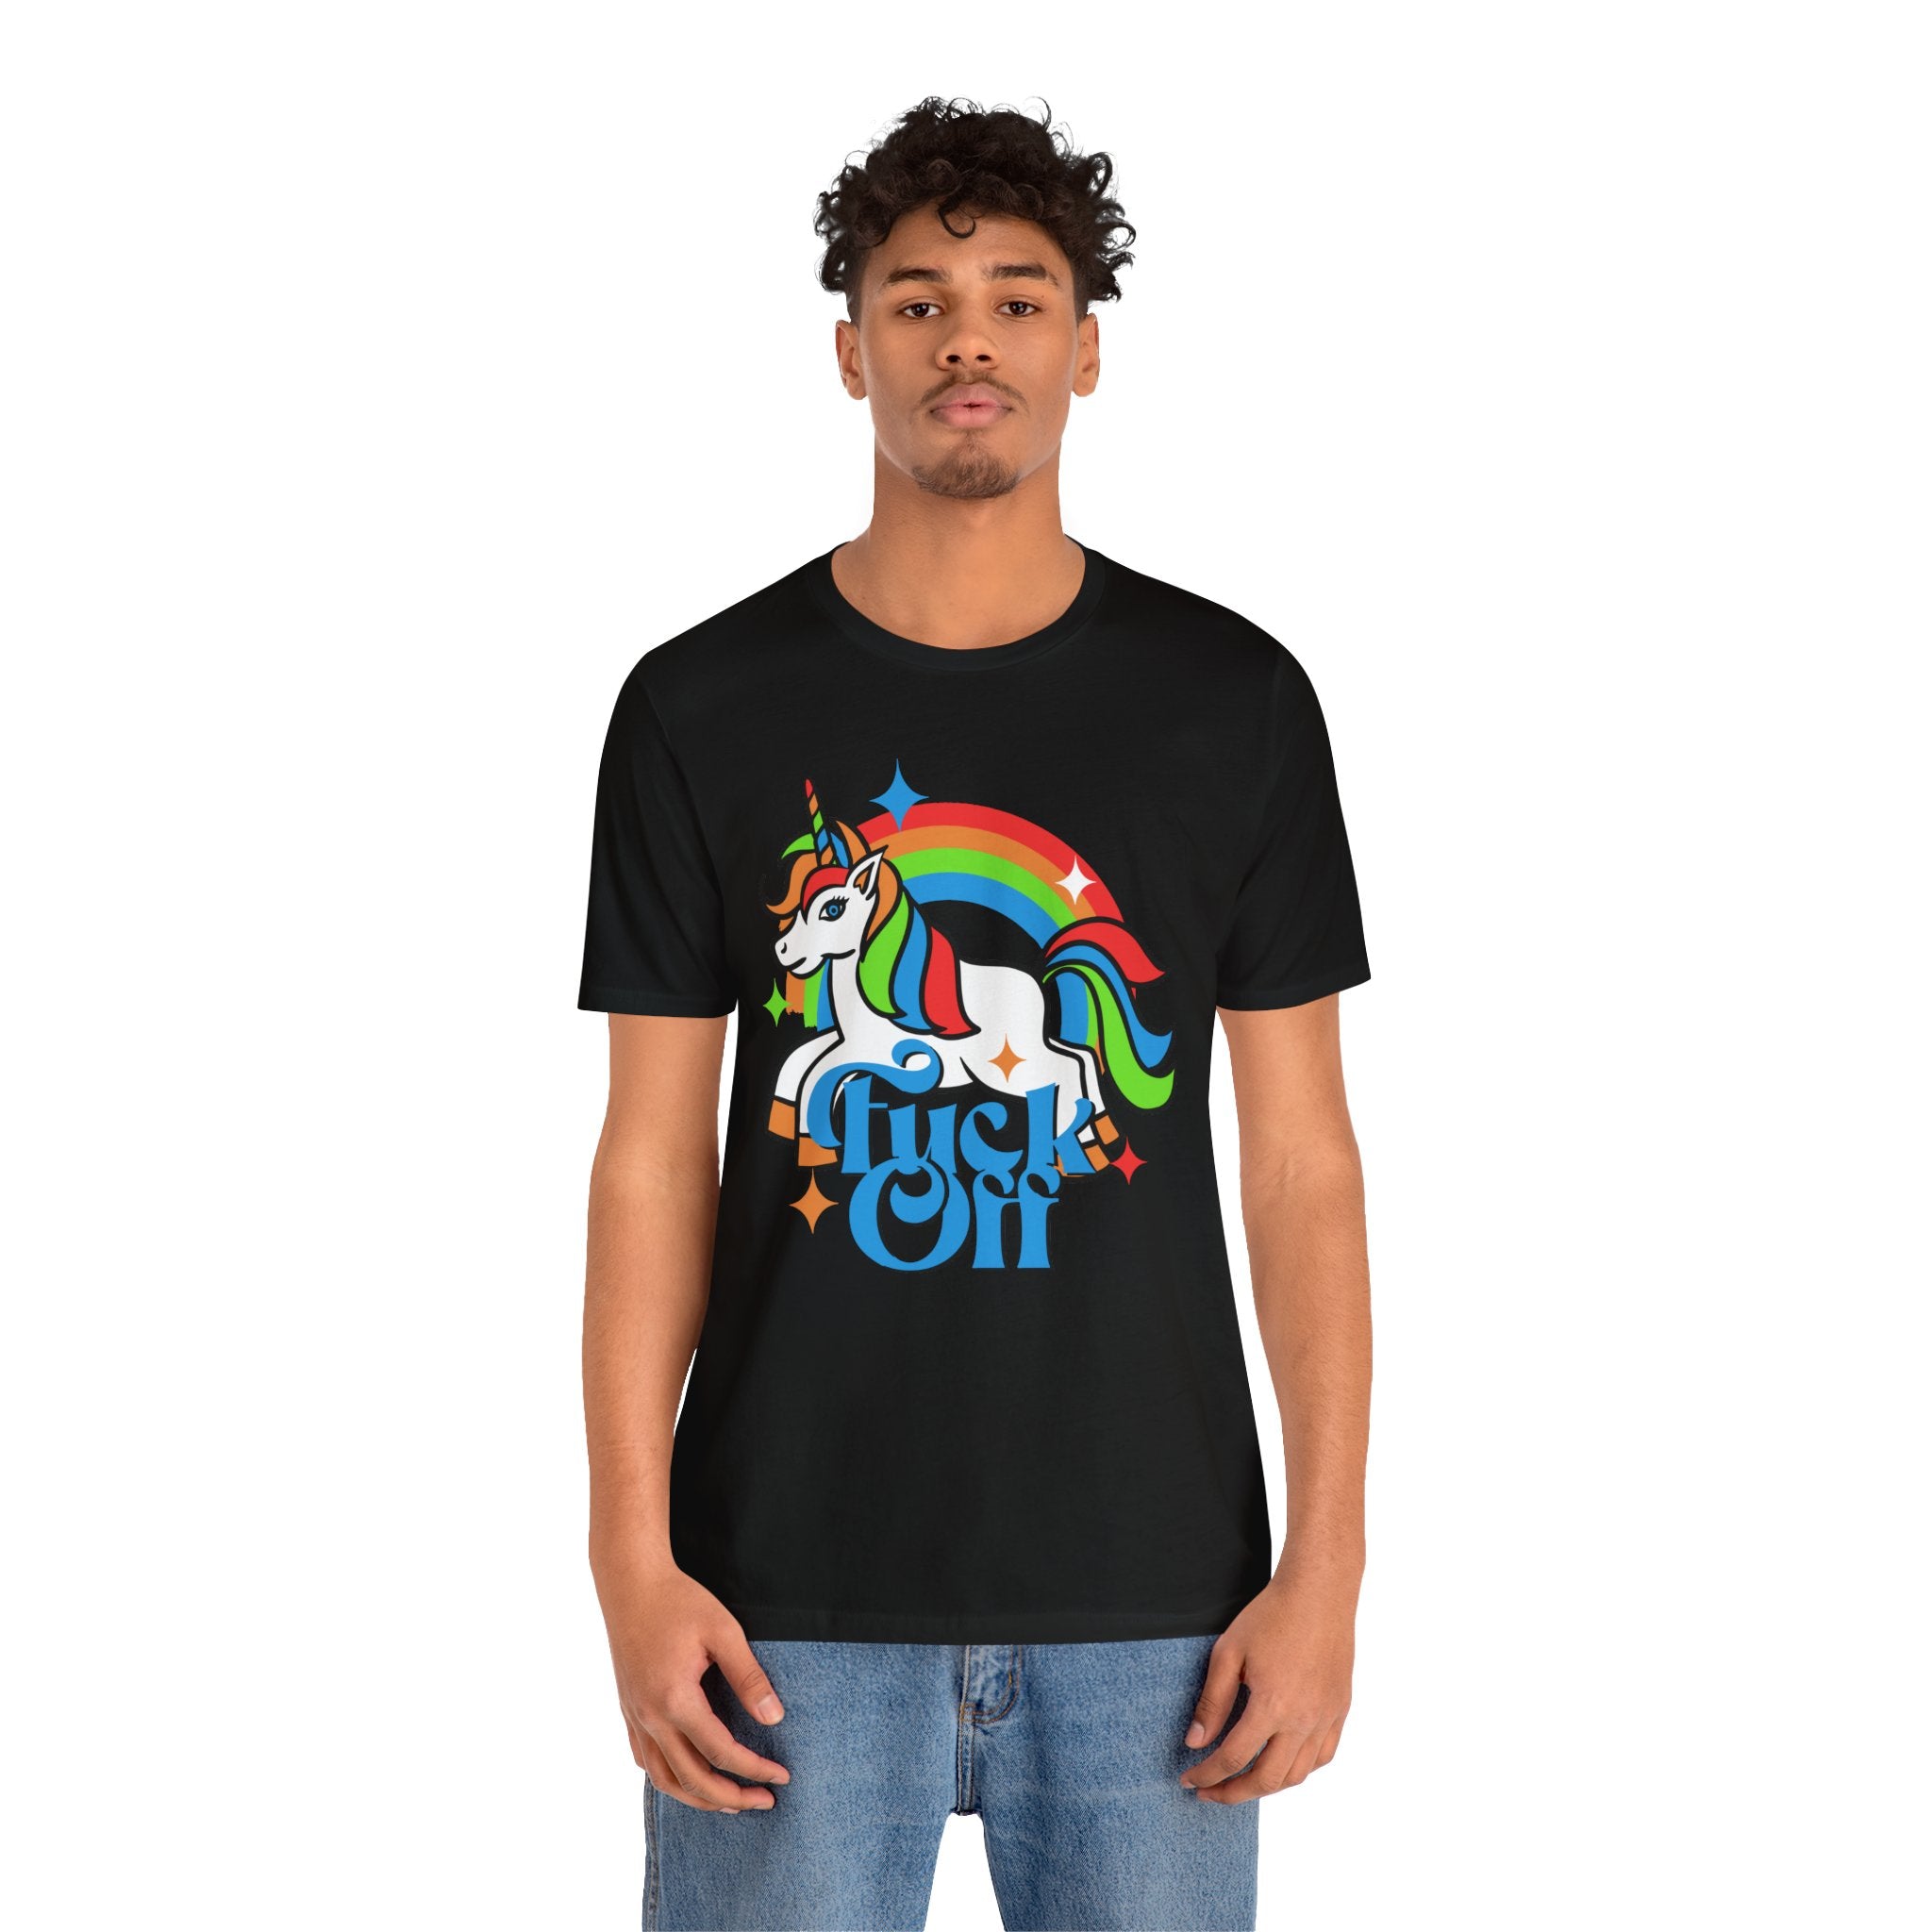 A man wearing a black F off T-shirt with a colorful unicorn and rainbow design printed on it.